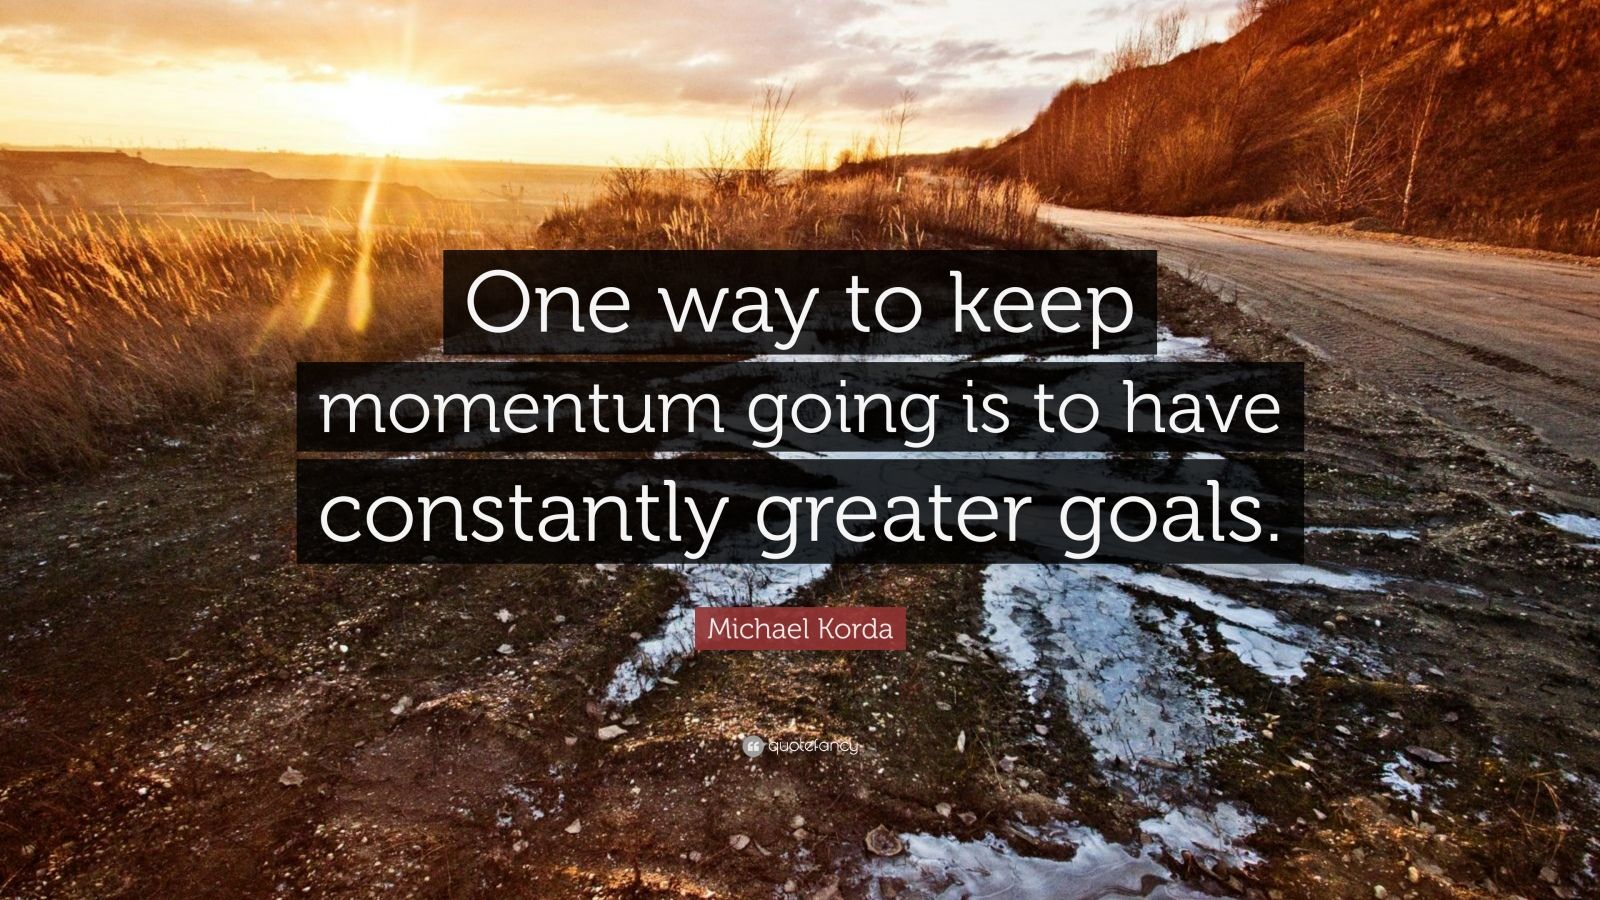 Michael Korda Quote: “One way to keep momentum going is to have